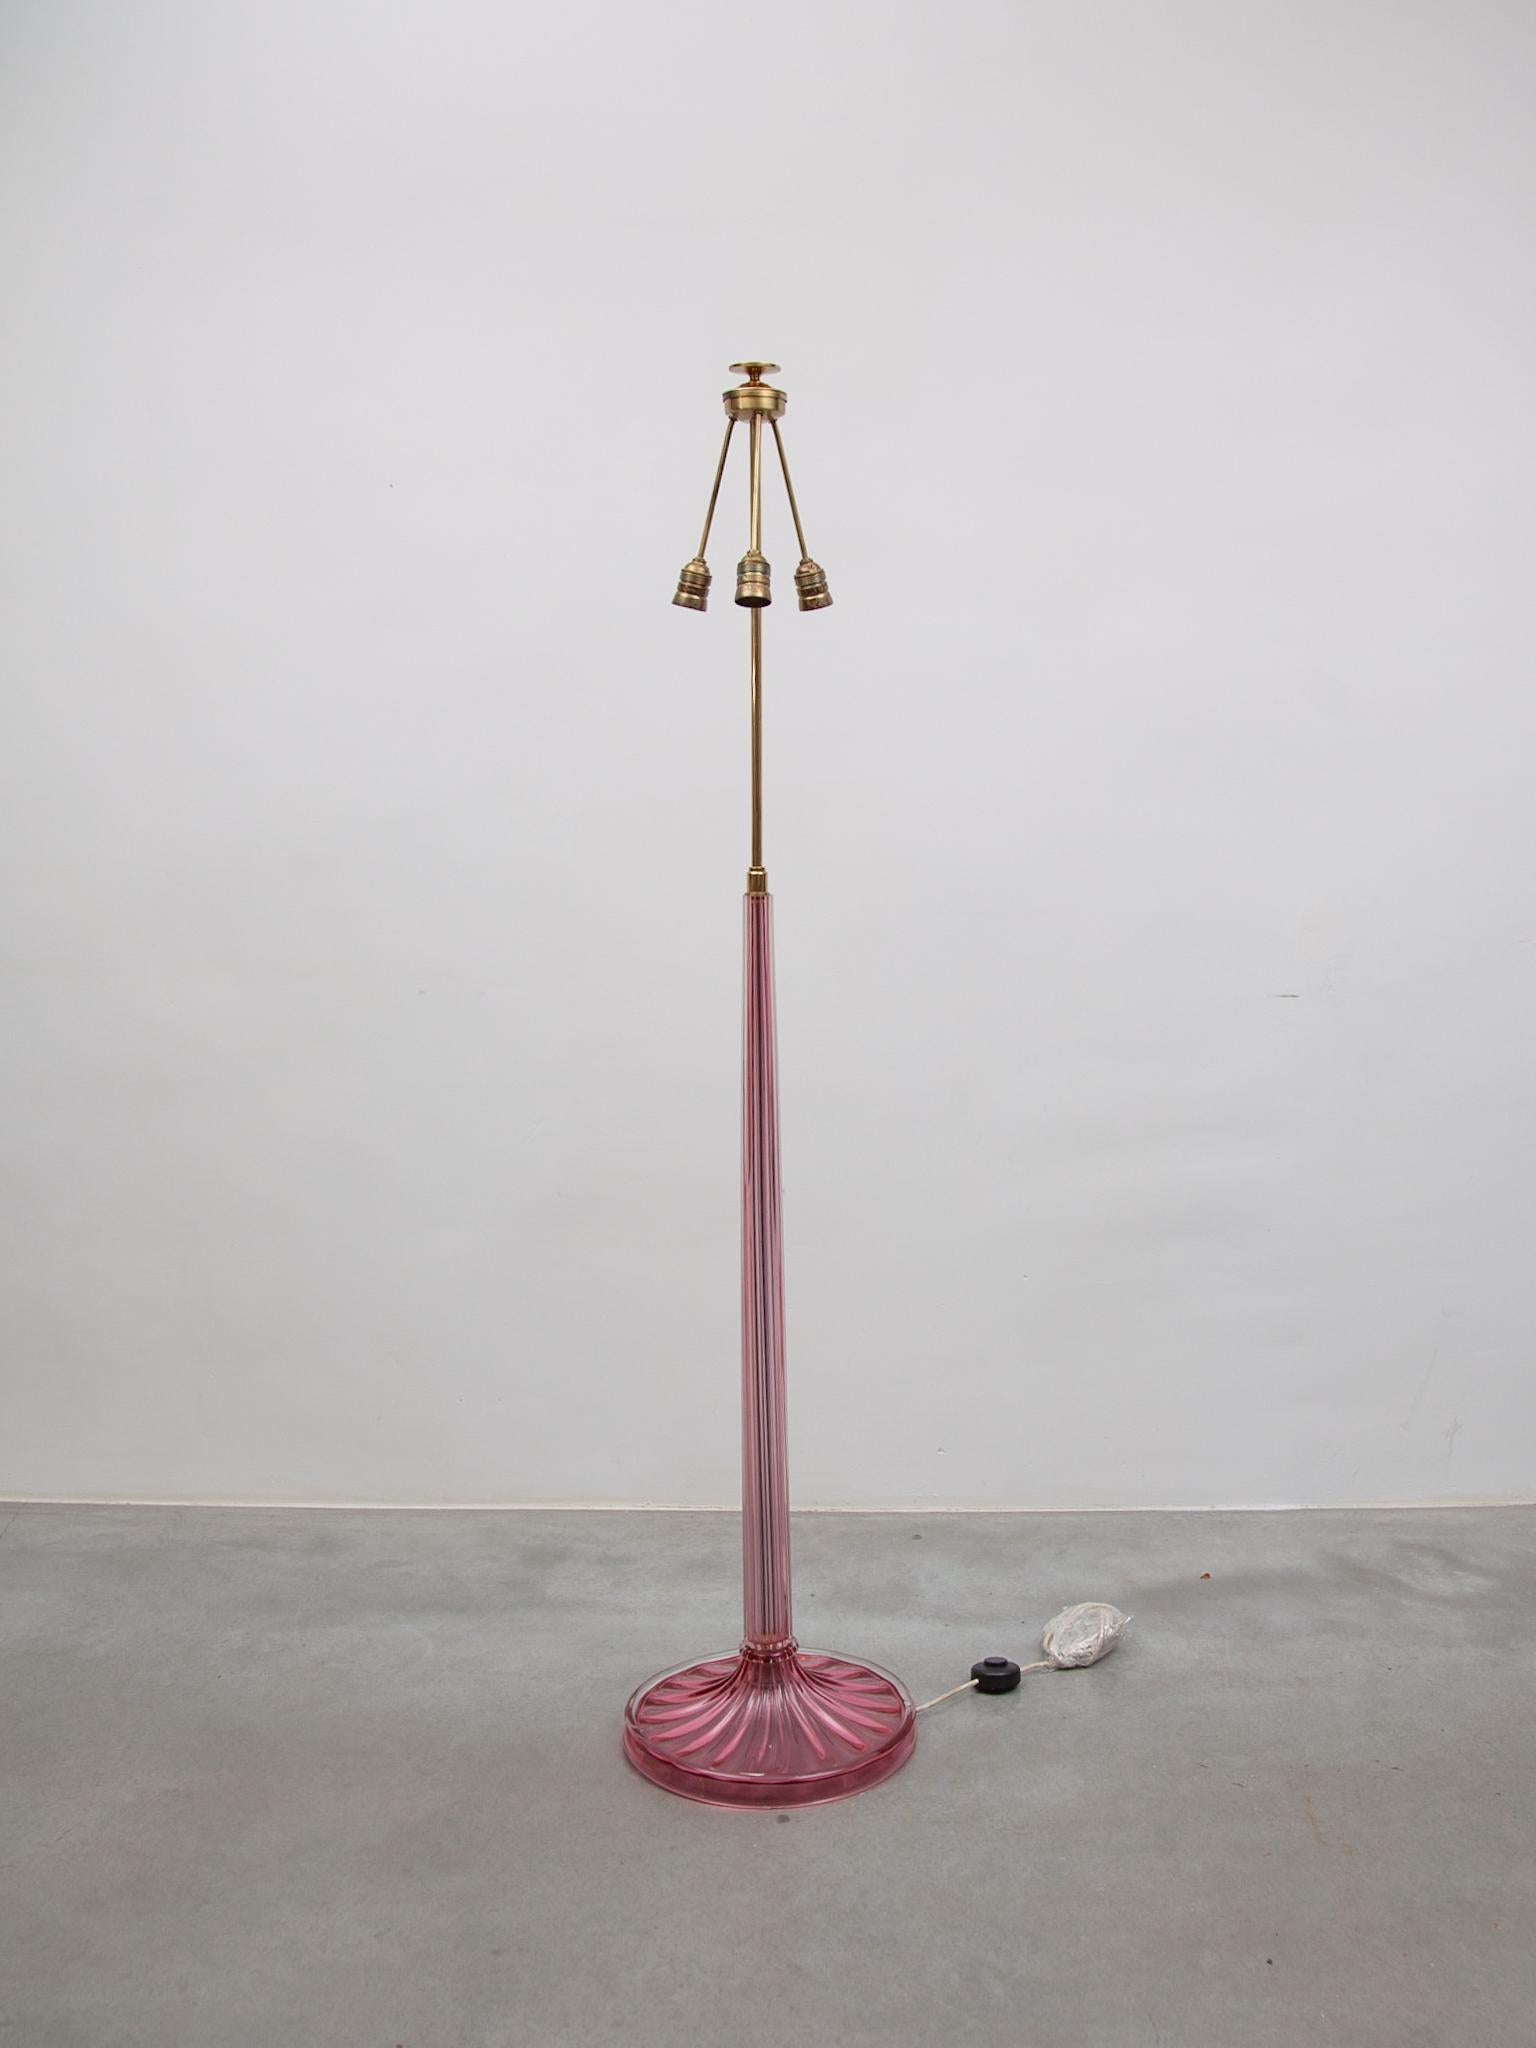 Mid-Century Modern Barovier e Tosso Pink Art Glass Floor Lamp, Murano Blown Glass, 1950s, Italy For Sale